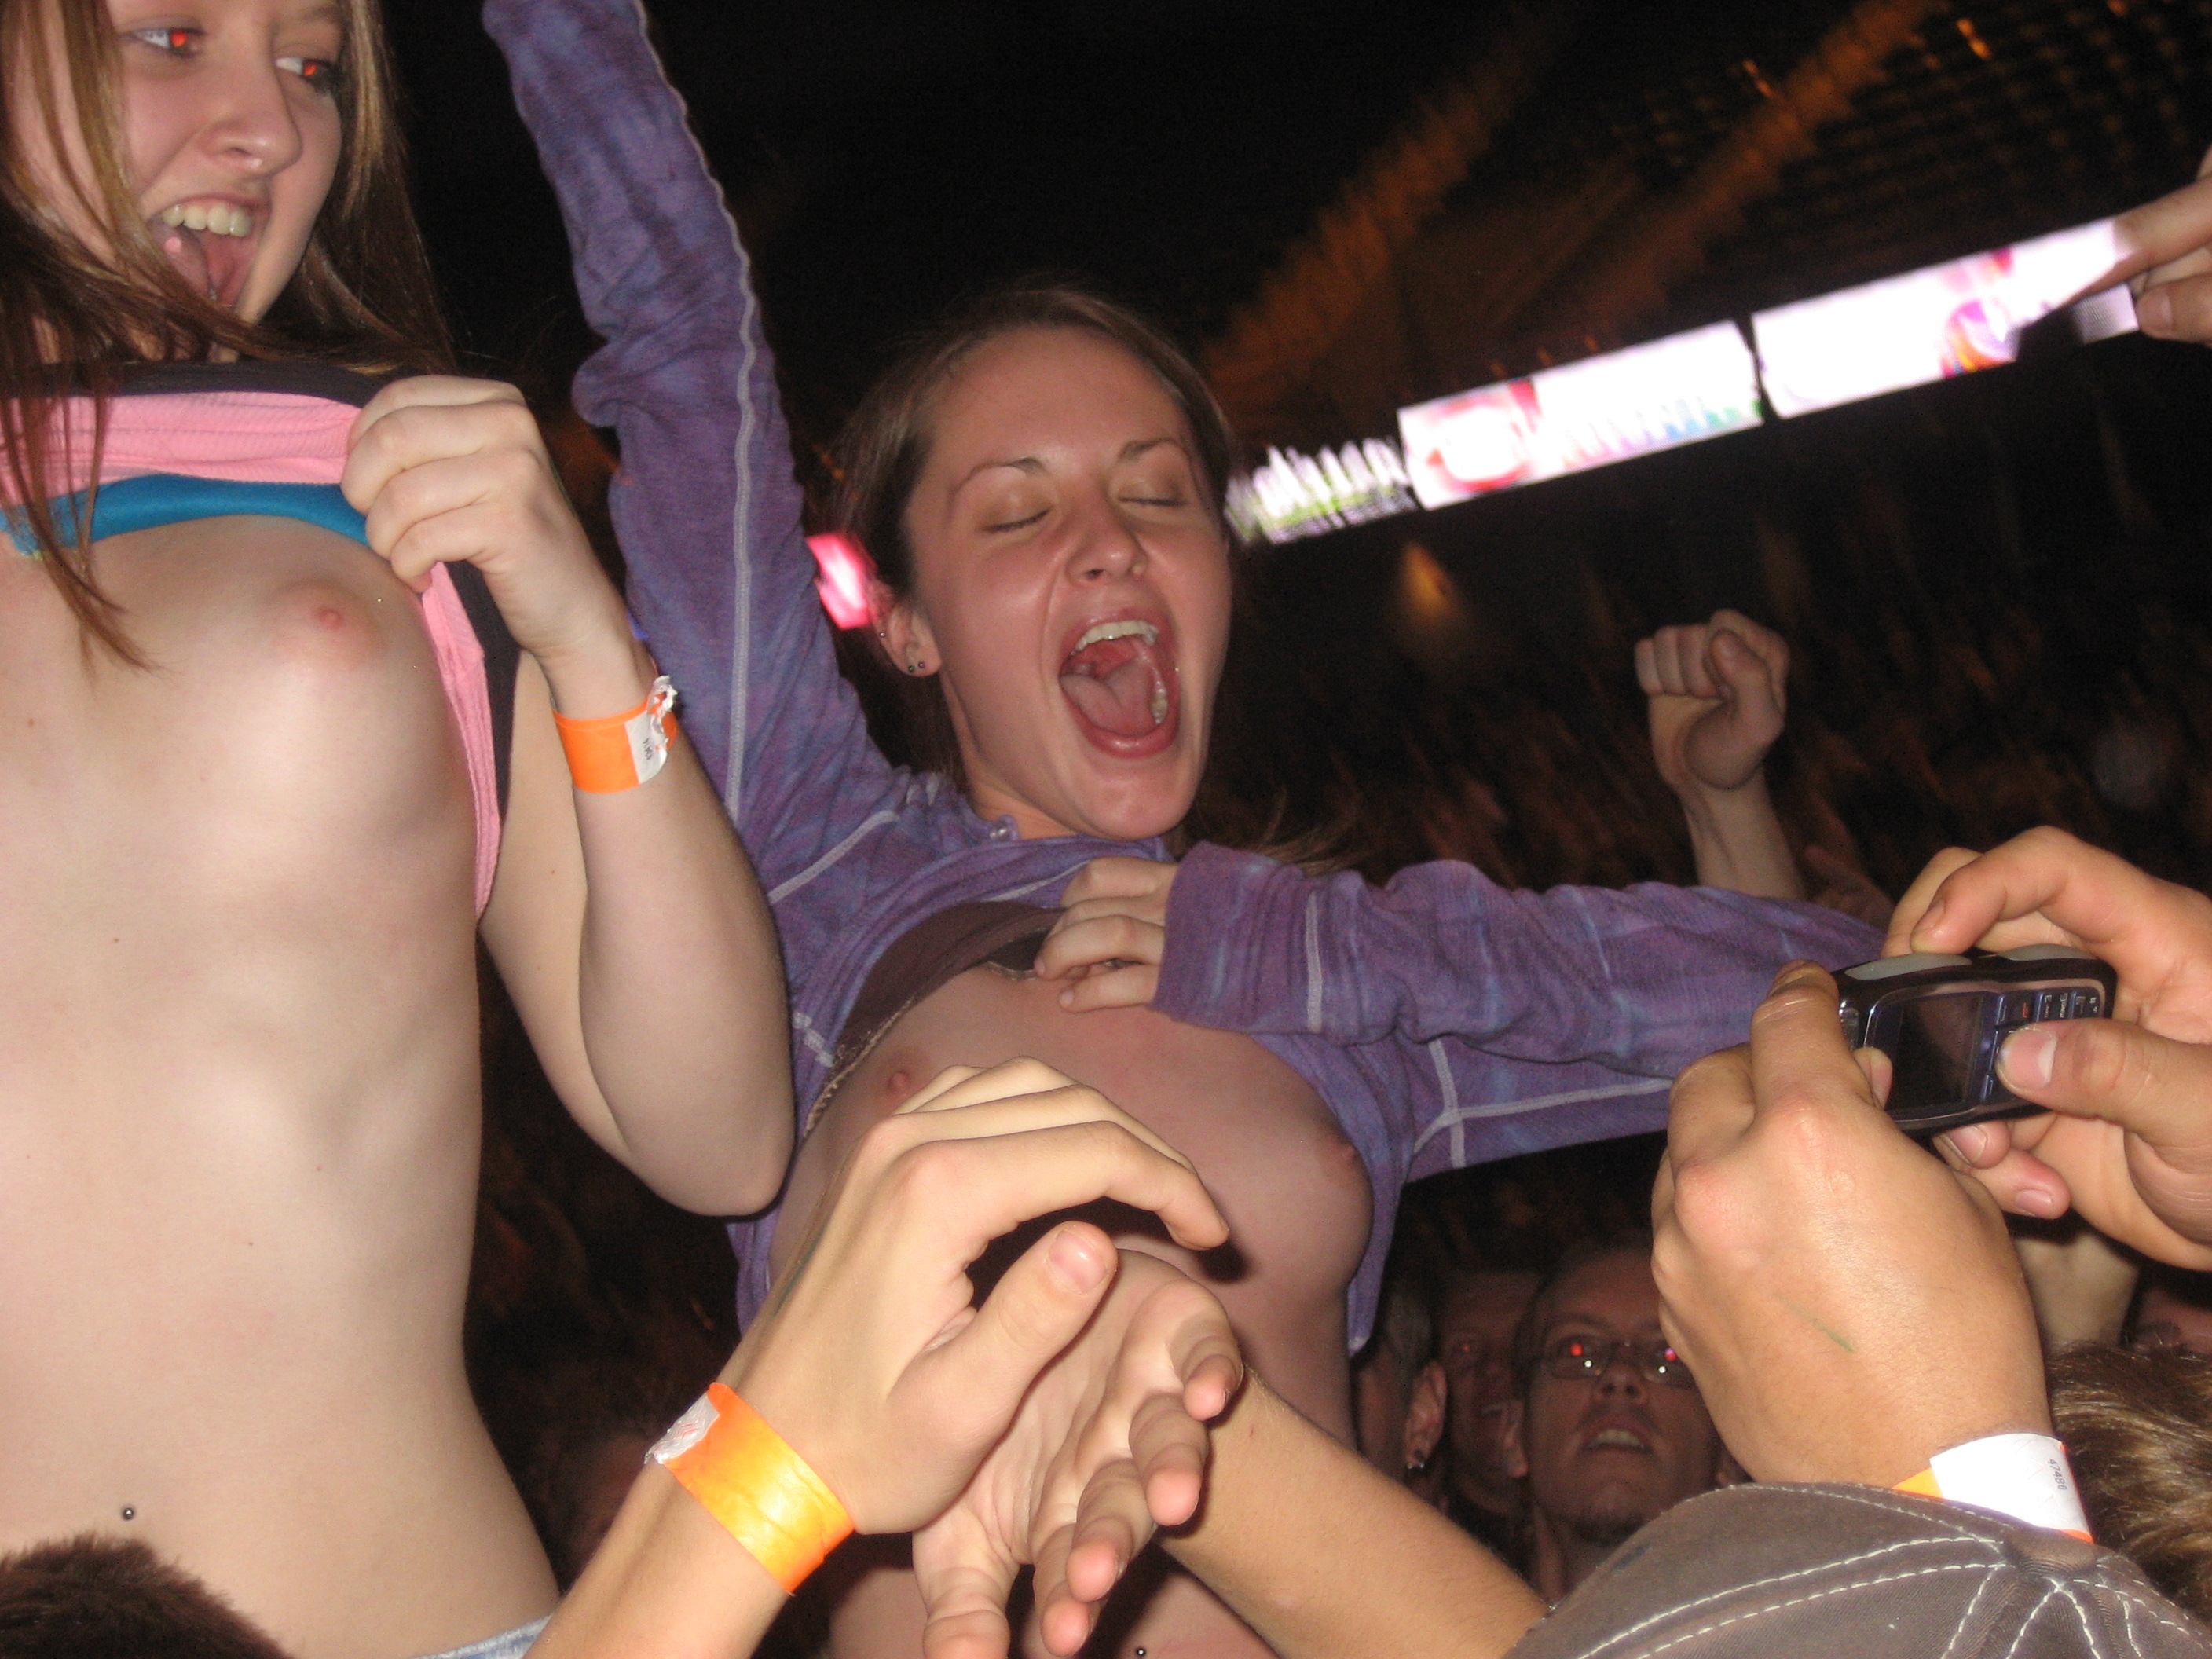 Best of Flashing at a concert